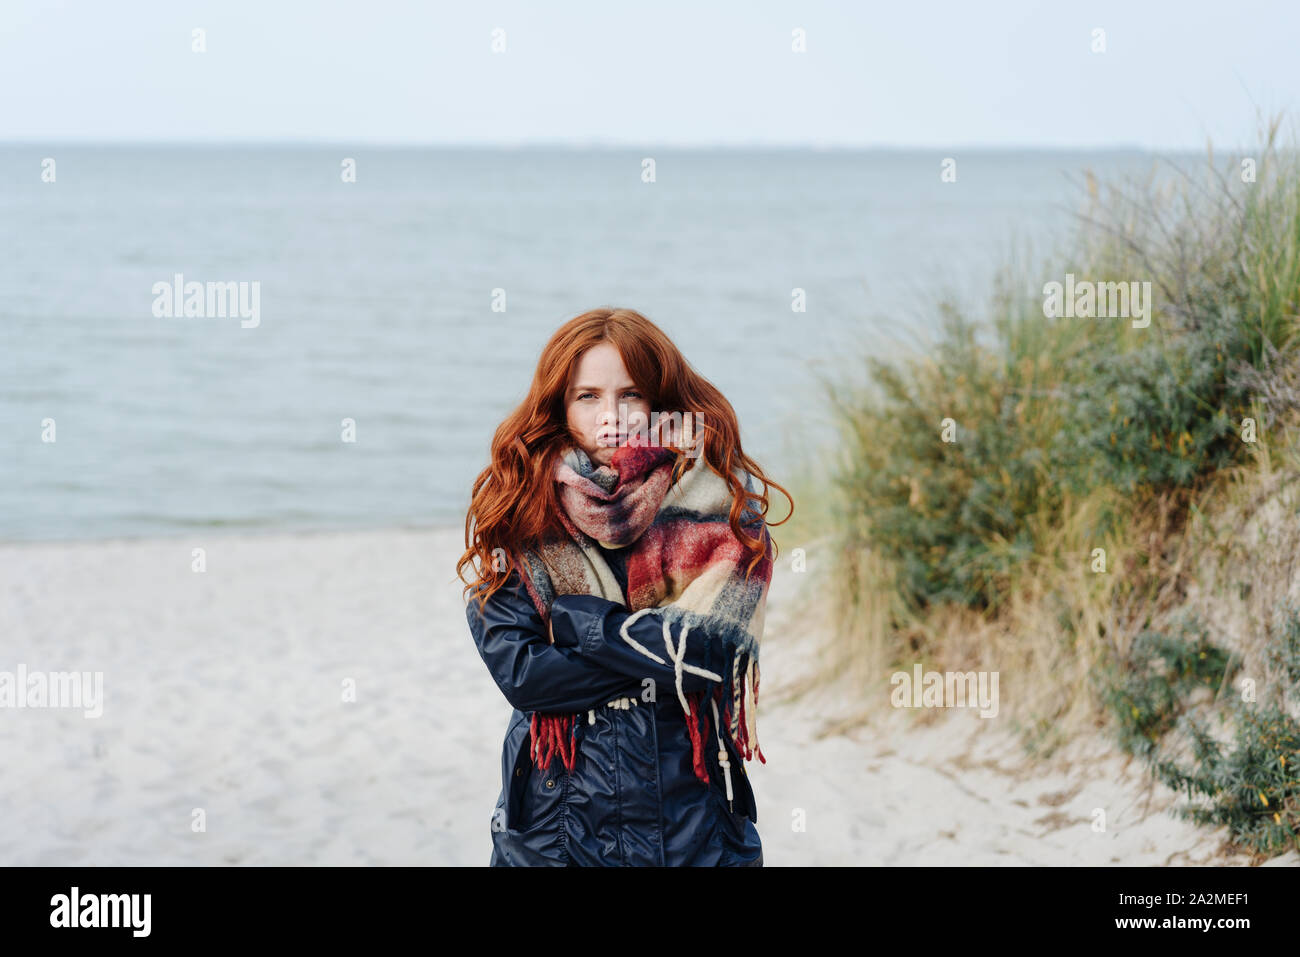 Unimpressed young woman shivering in the cold on a late autumn or winter day as she takes a walk on a sandy beach in thick anorak and scarf Stock Photo